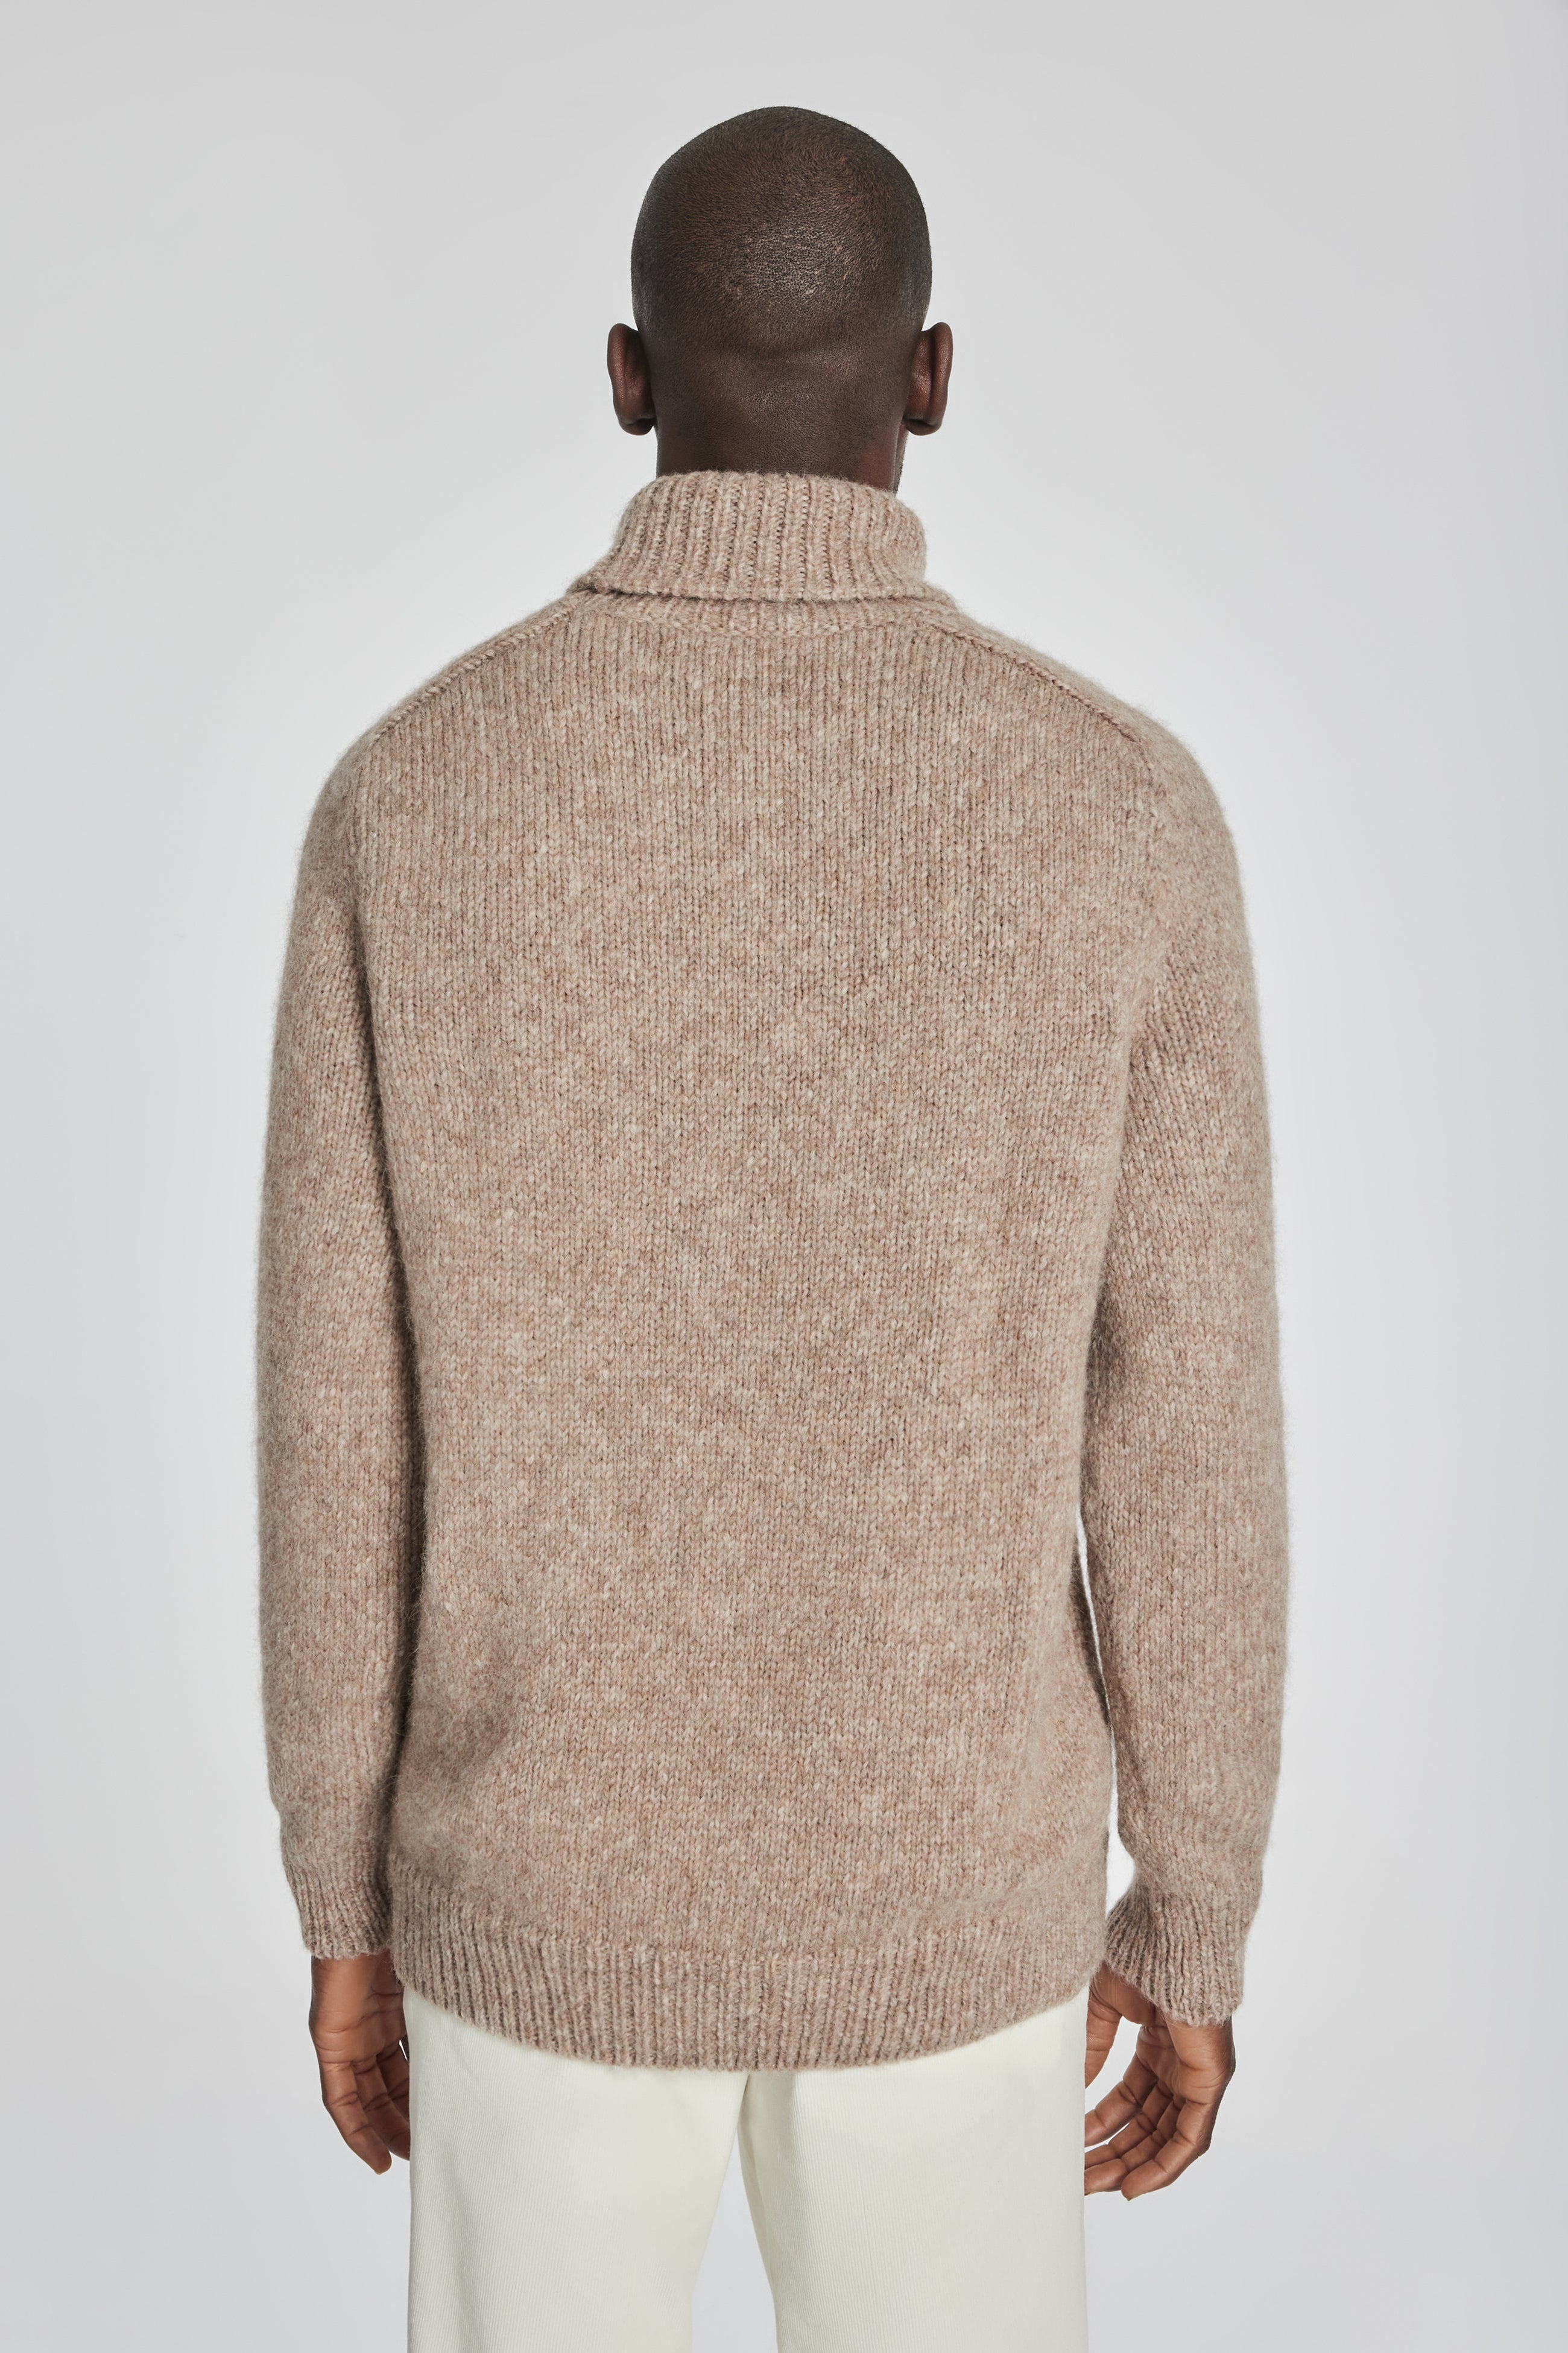 Alt view 5 Mount Pleasant Chunky Knit Turtleneck Sweater in Camel